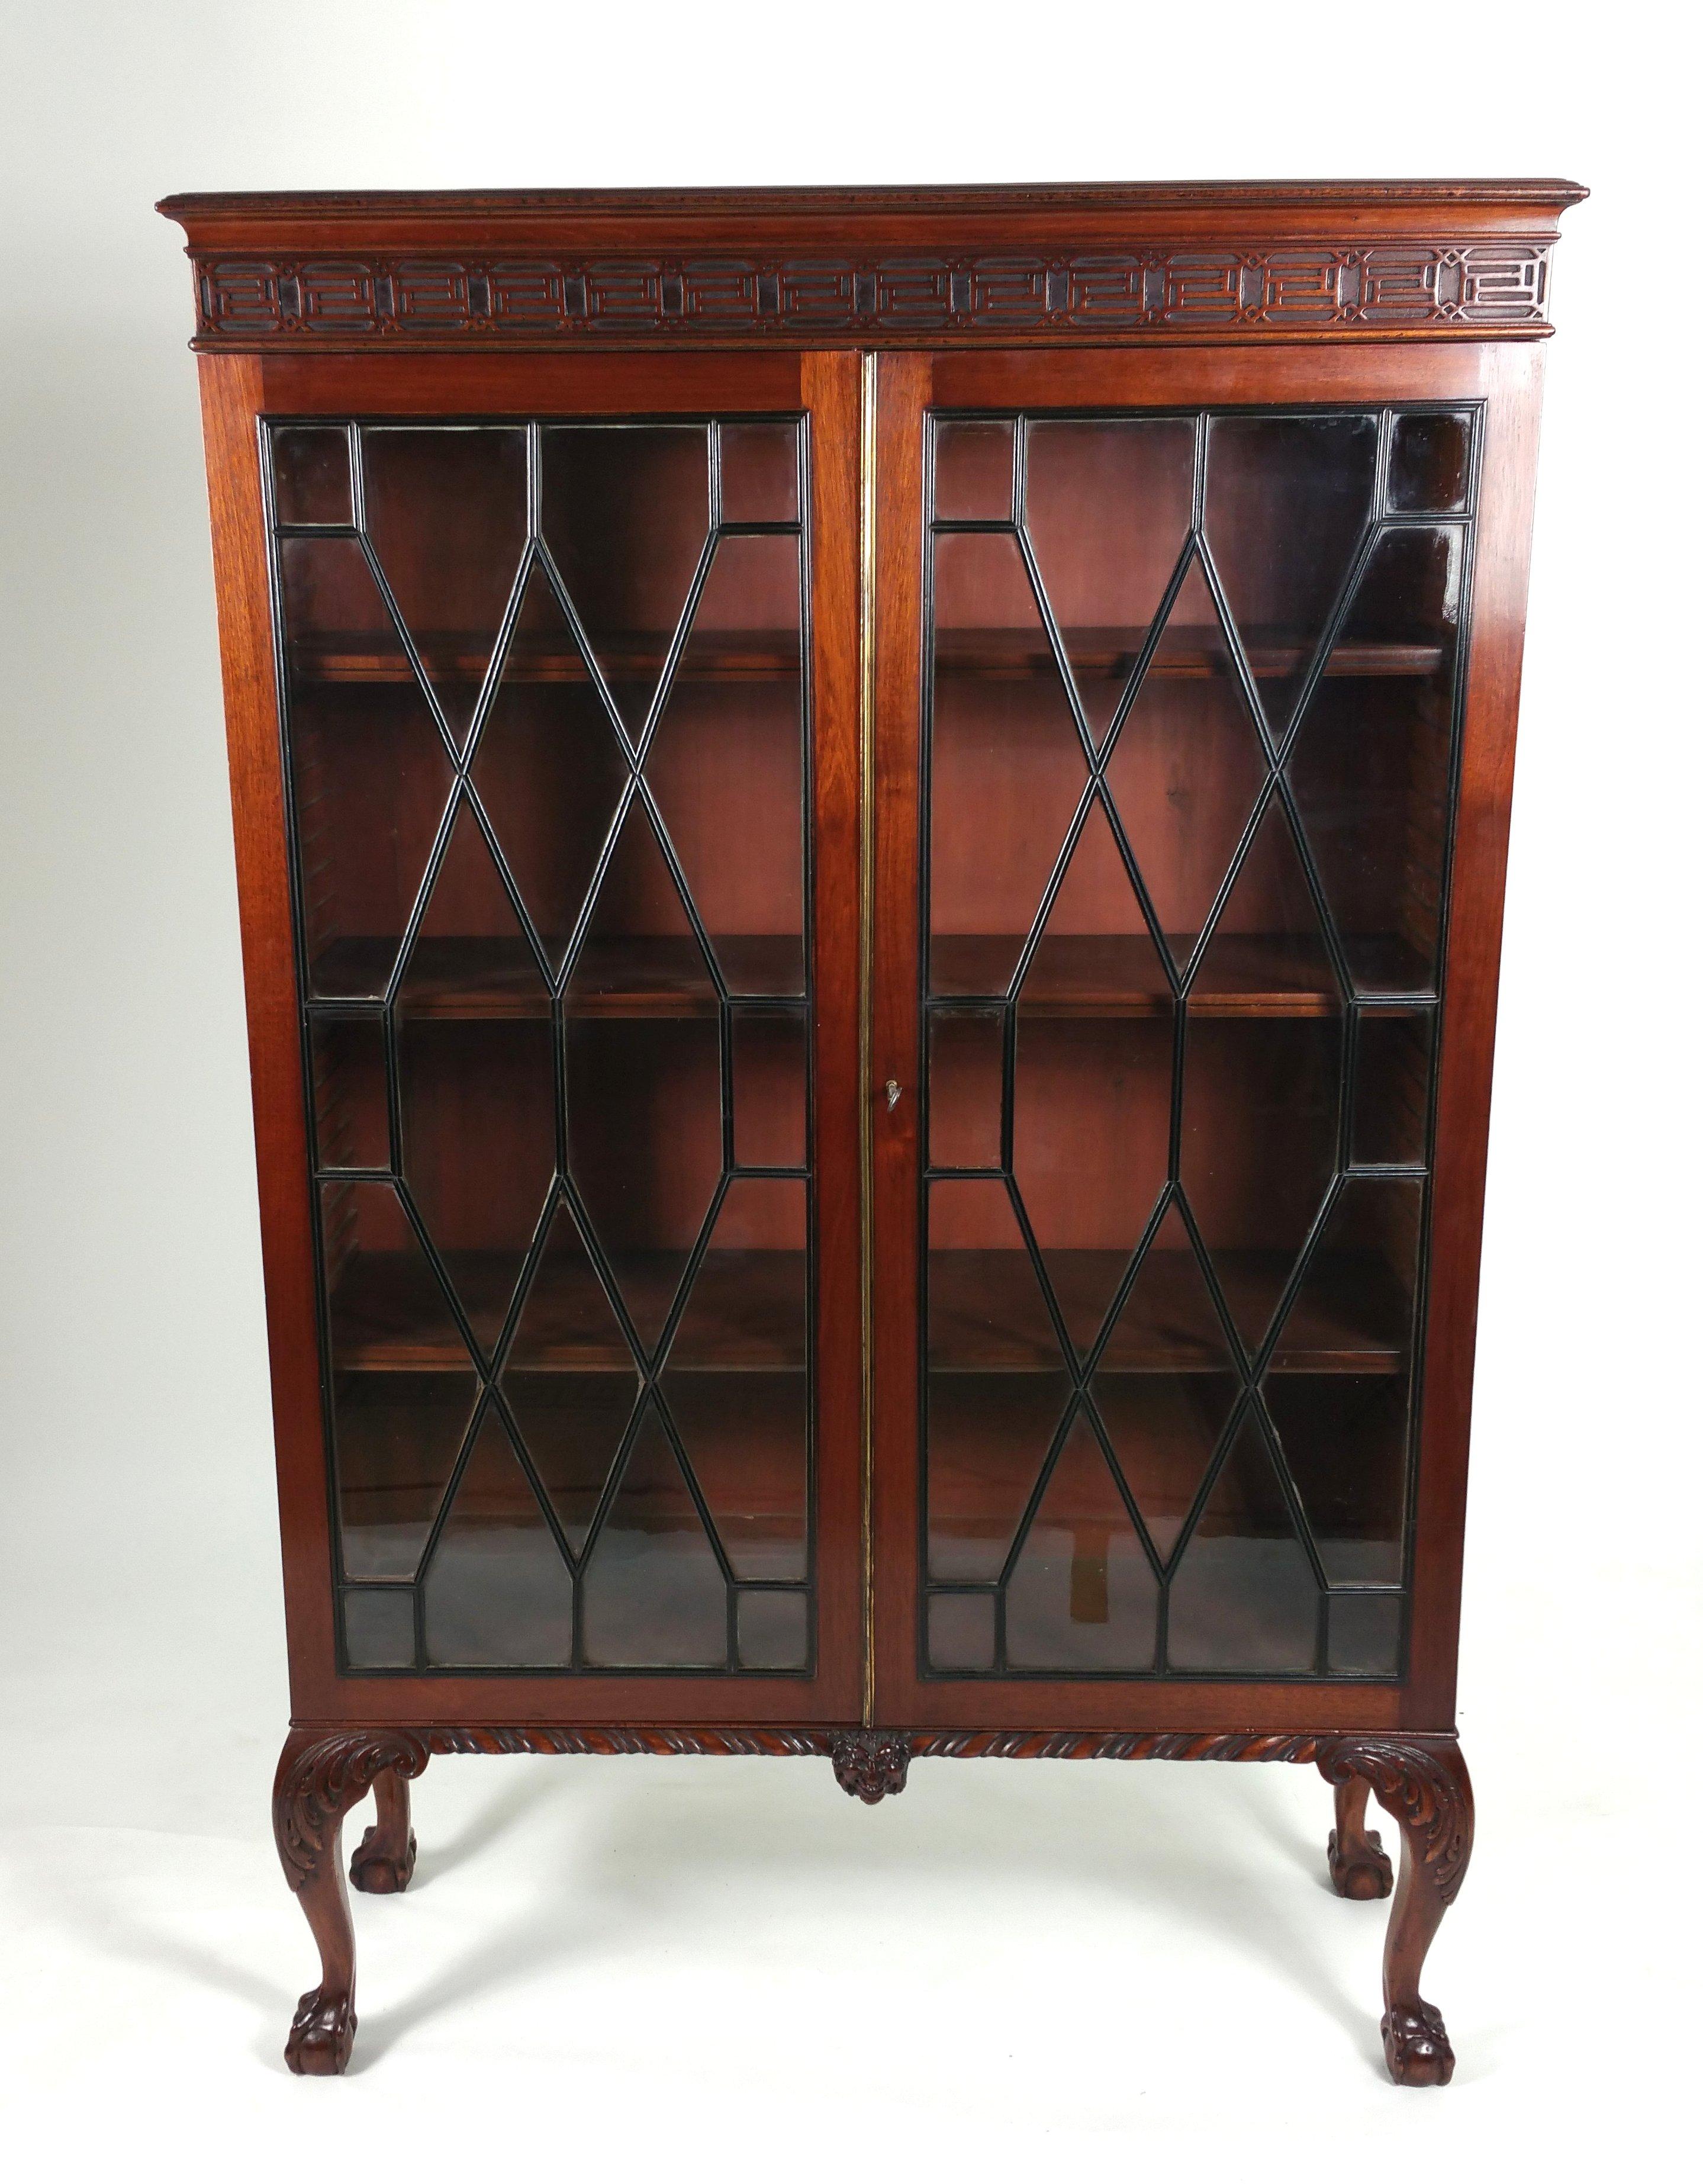 British Pair of Late 19th Century Chippendale Revival Mahogany 2-Door Bookcases